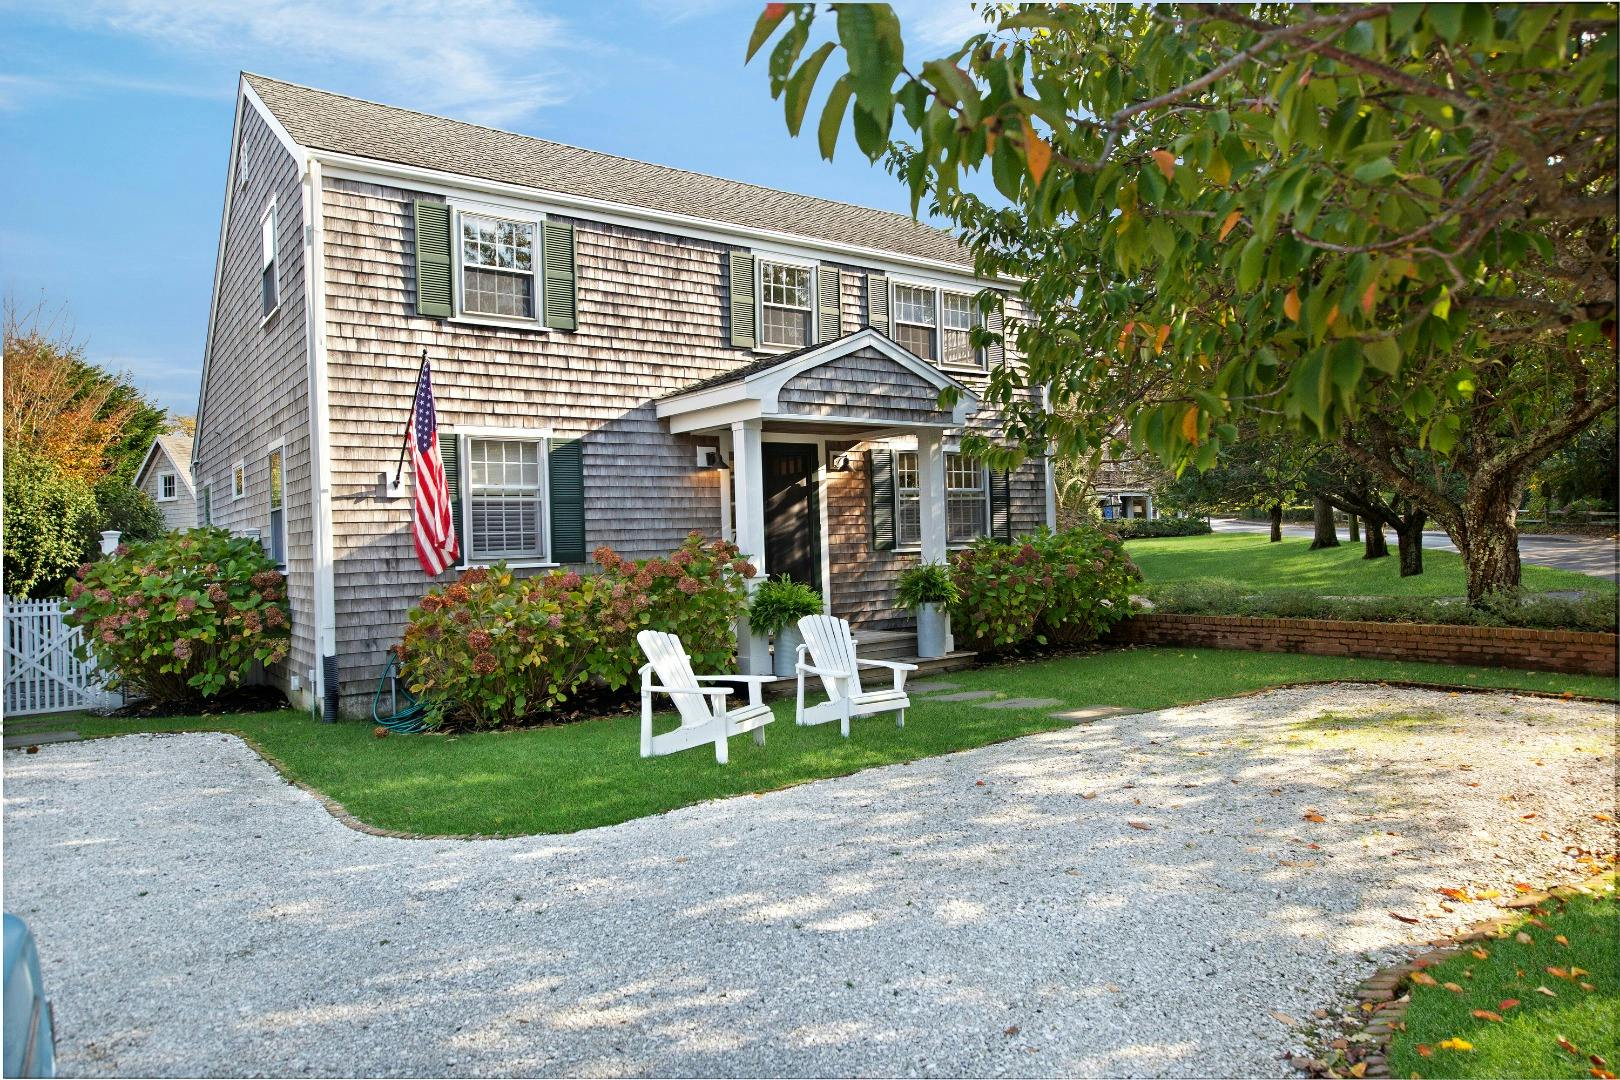 79 Peases Point Way, Edgartown MA 02539